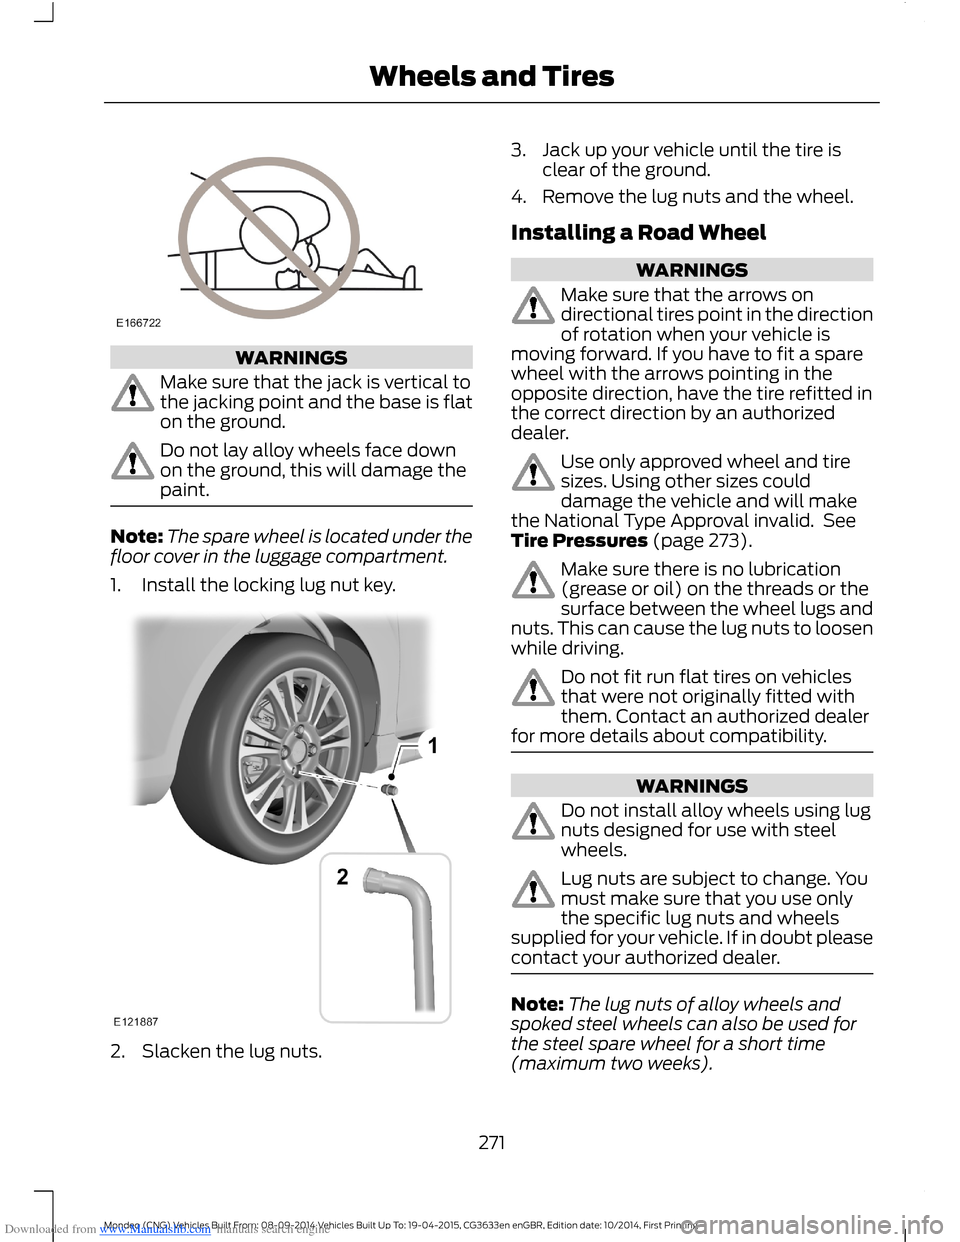 FORD MONDEO 2014 4.G Owners Manual Downloaded from www.Manualslib.com manuals search engine WARNINGS
Make sure that the jack is vertical tothe jacking point and the base is flaton the ground.
Do not lay alloy wheels face downon the gro